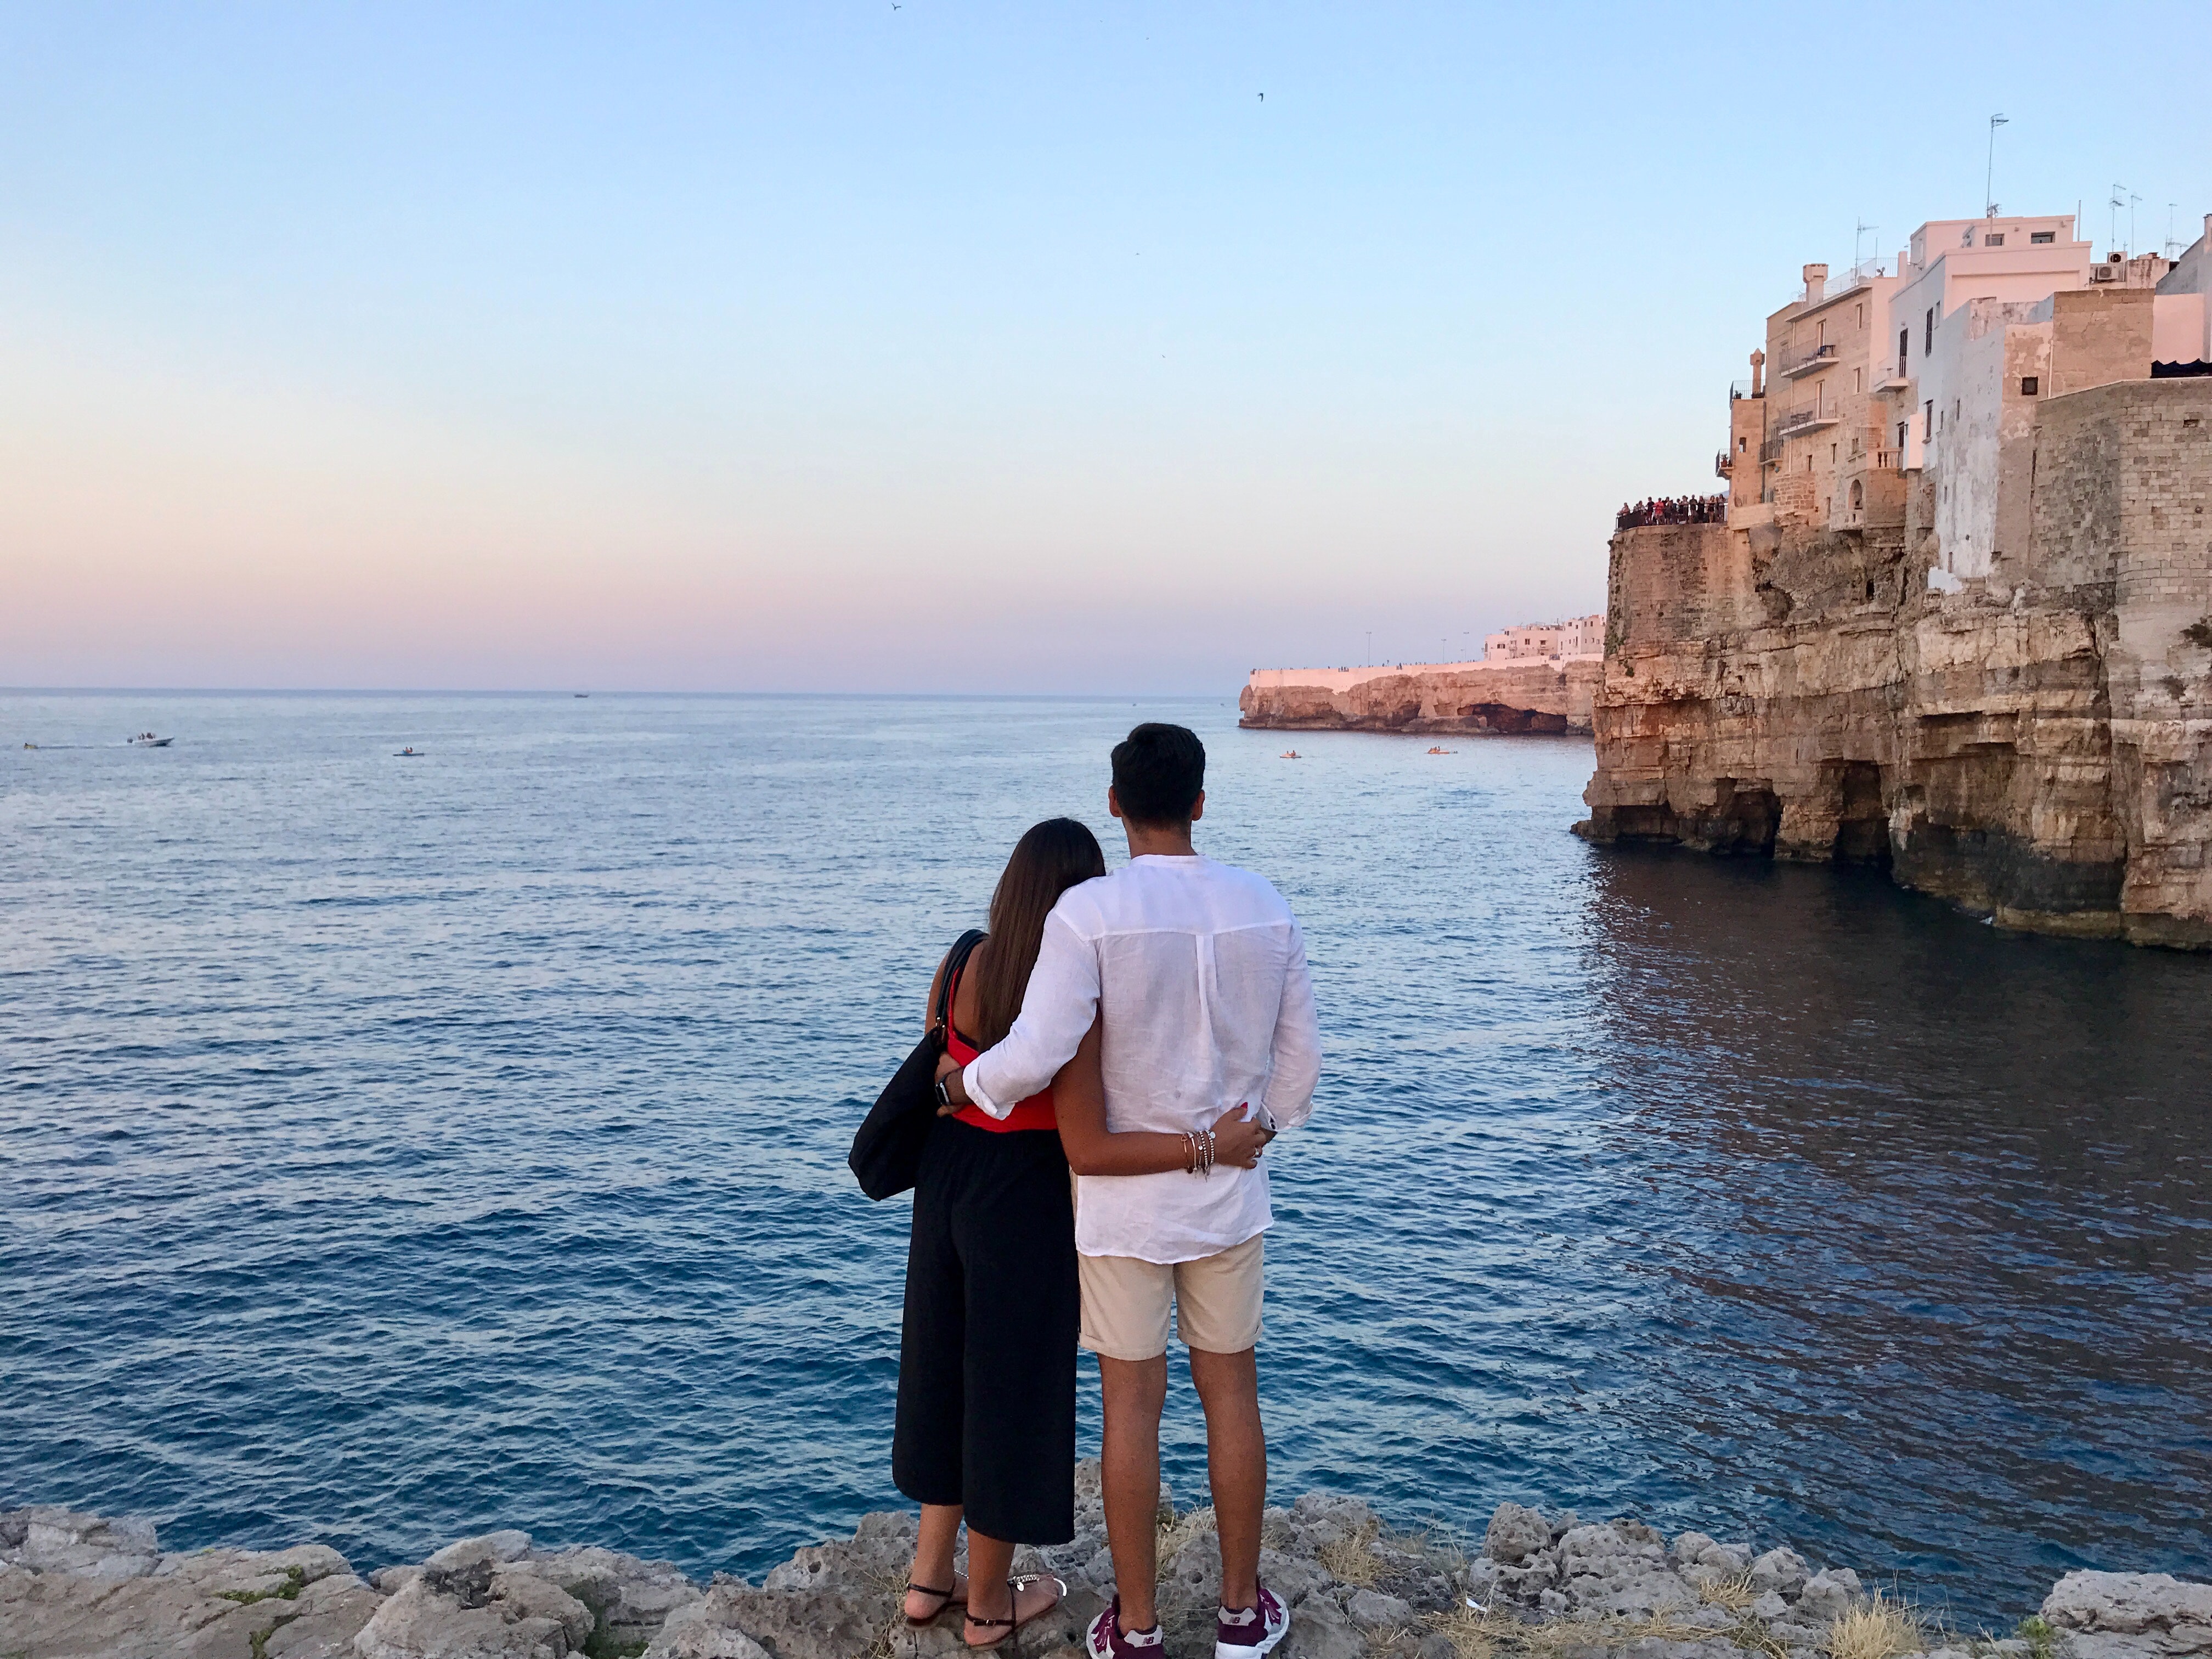 Man in white dress shirt standing beside the woman in black and red dress while watching the blue calm water near brown concrete buildings under white and blue sky at daytime photo